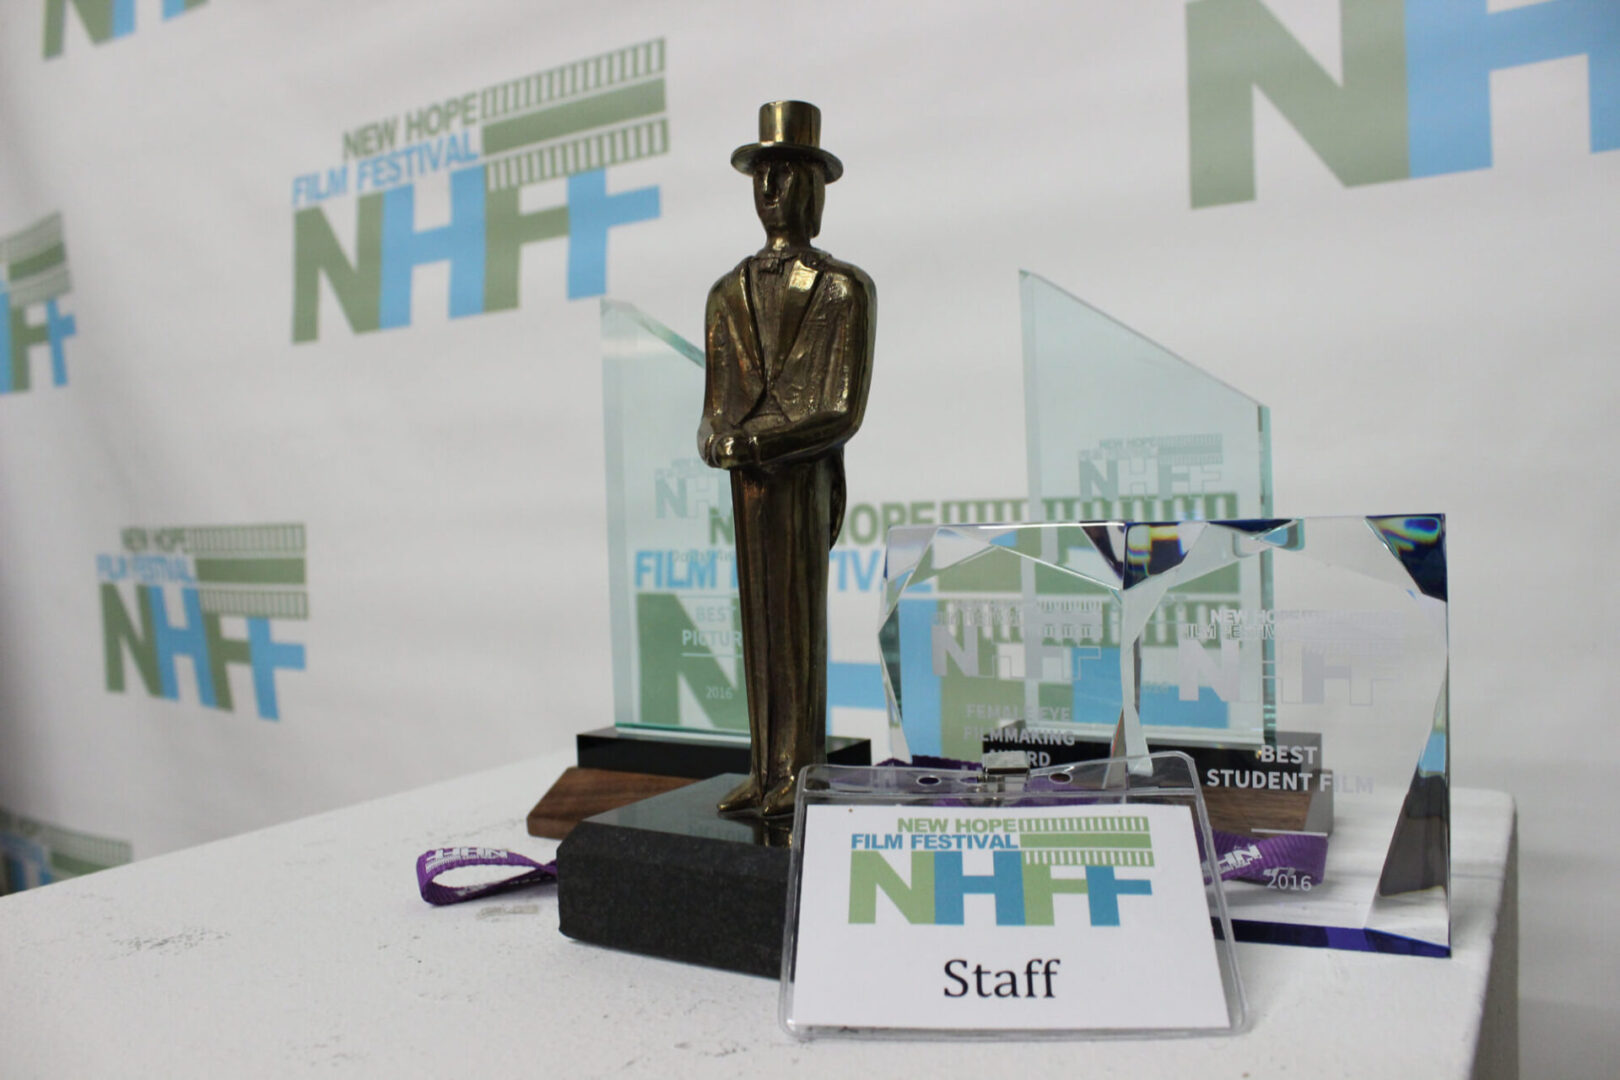 A view of a trophy for a film festival